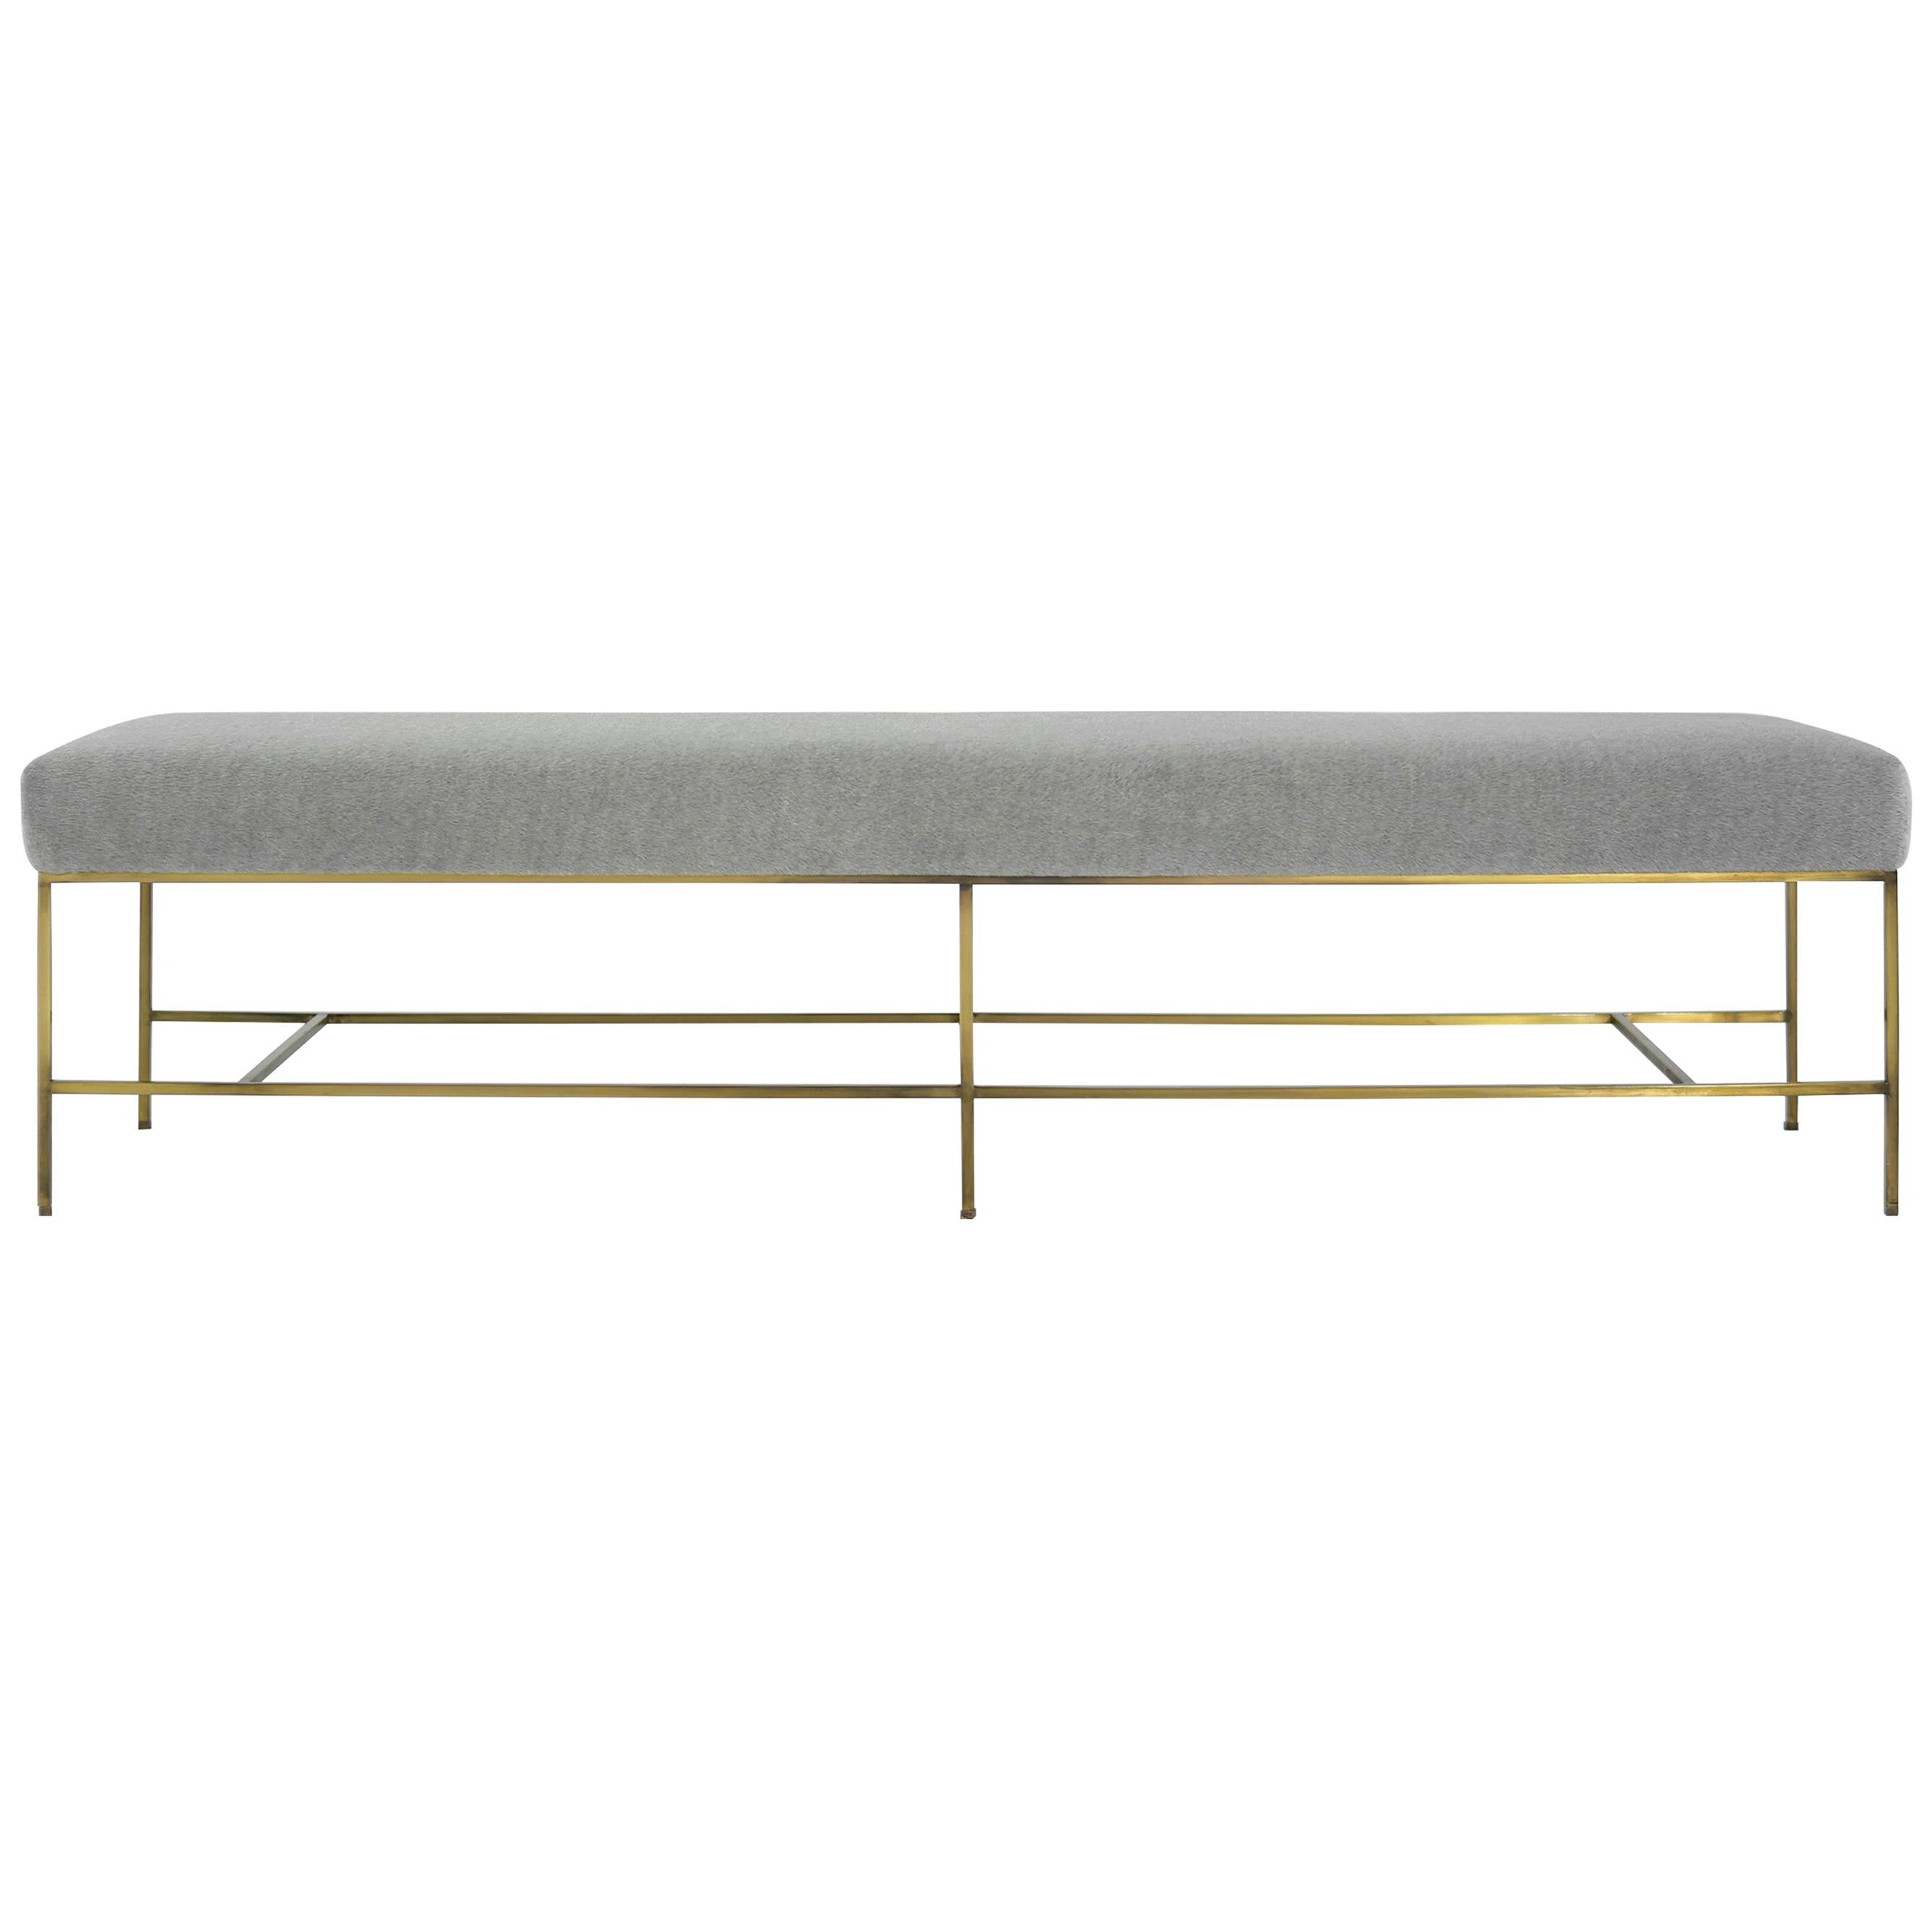 The Architectural Bench by Stamford Modern For Sale